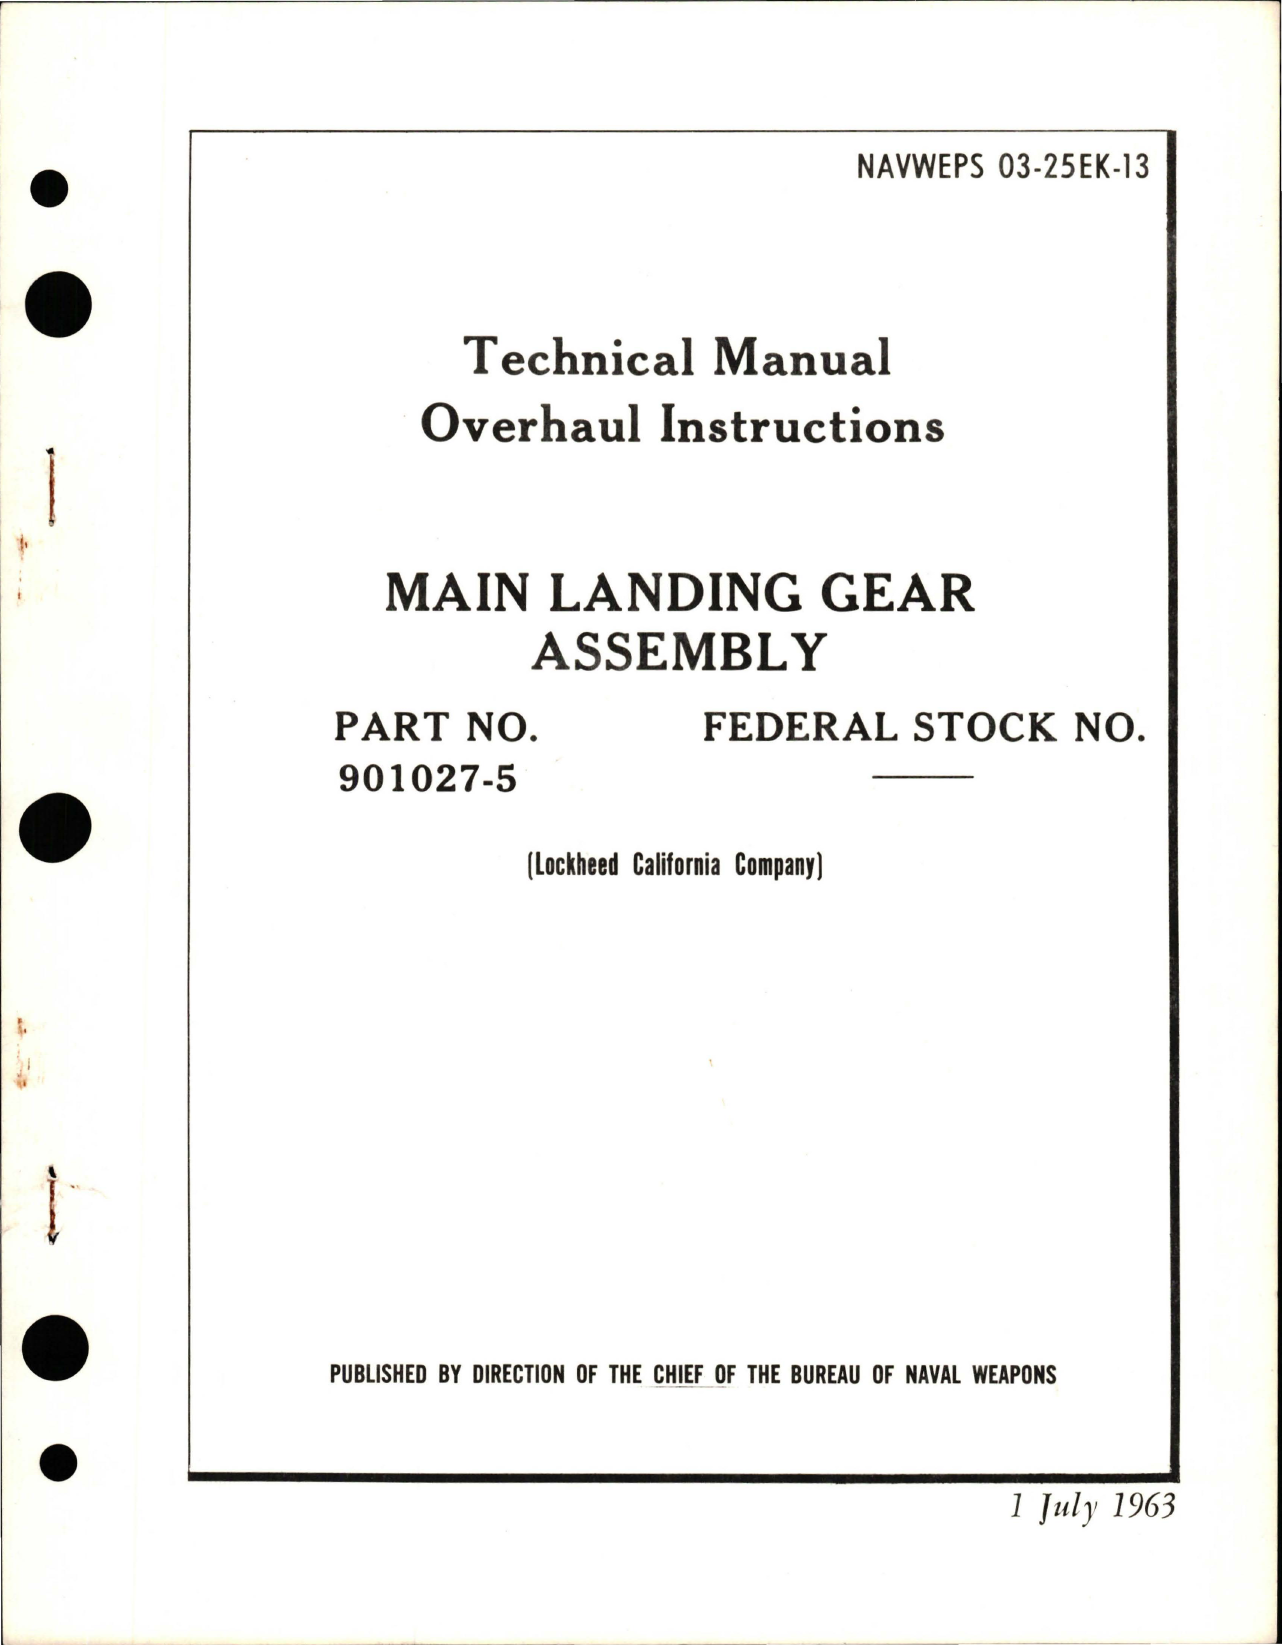 Sample page 1 from AirCorps Library document: Overhaul Instructions for Main Landing Gear Assembly - Part 901027-5